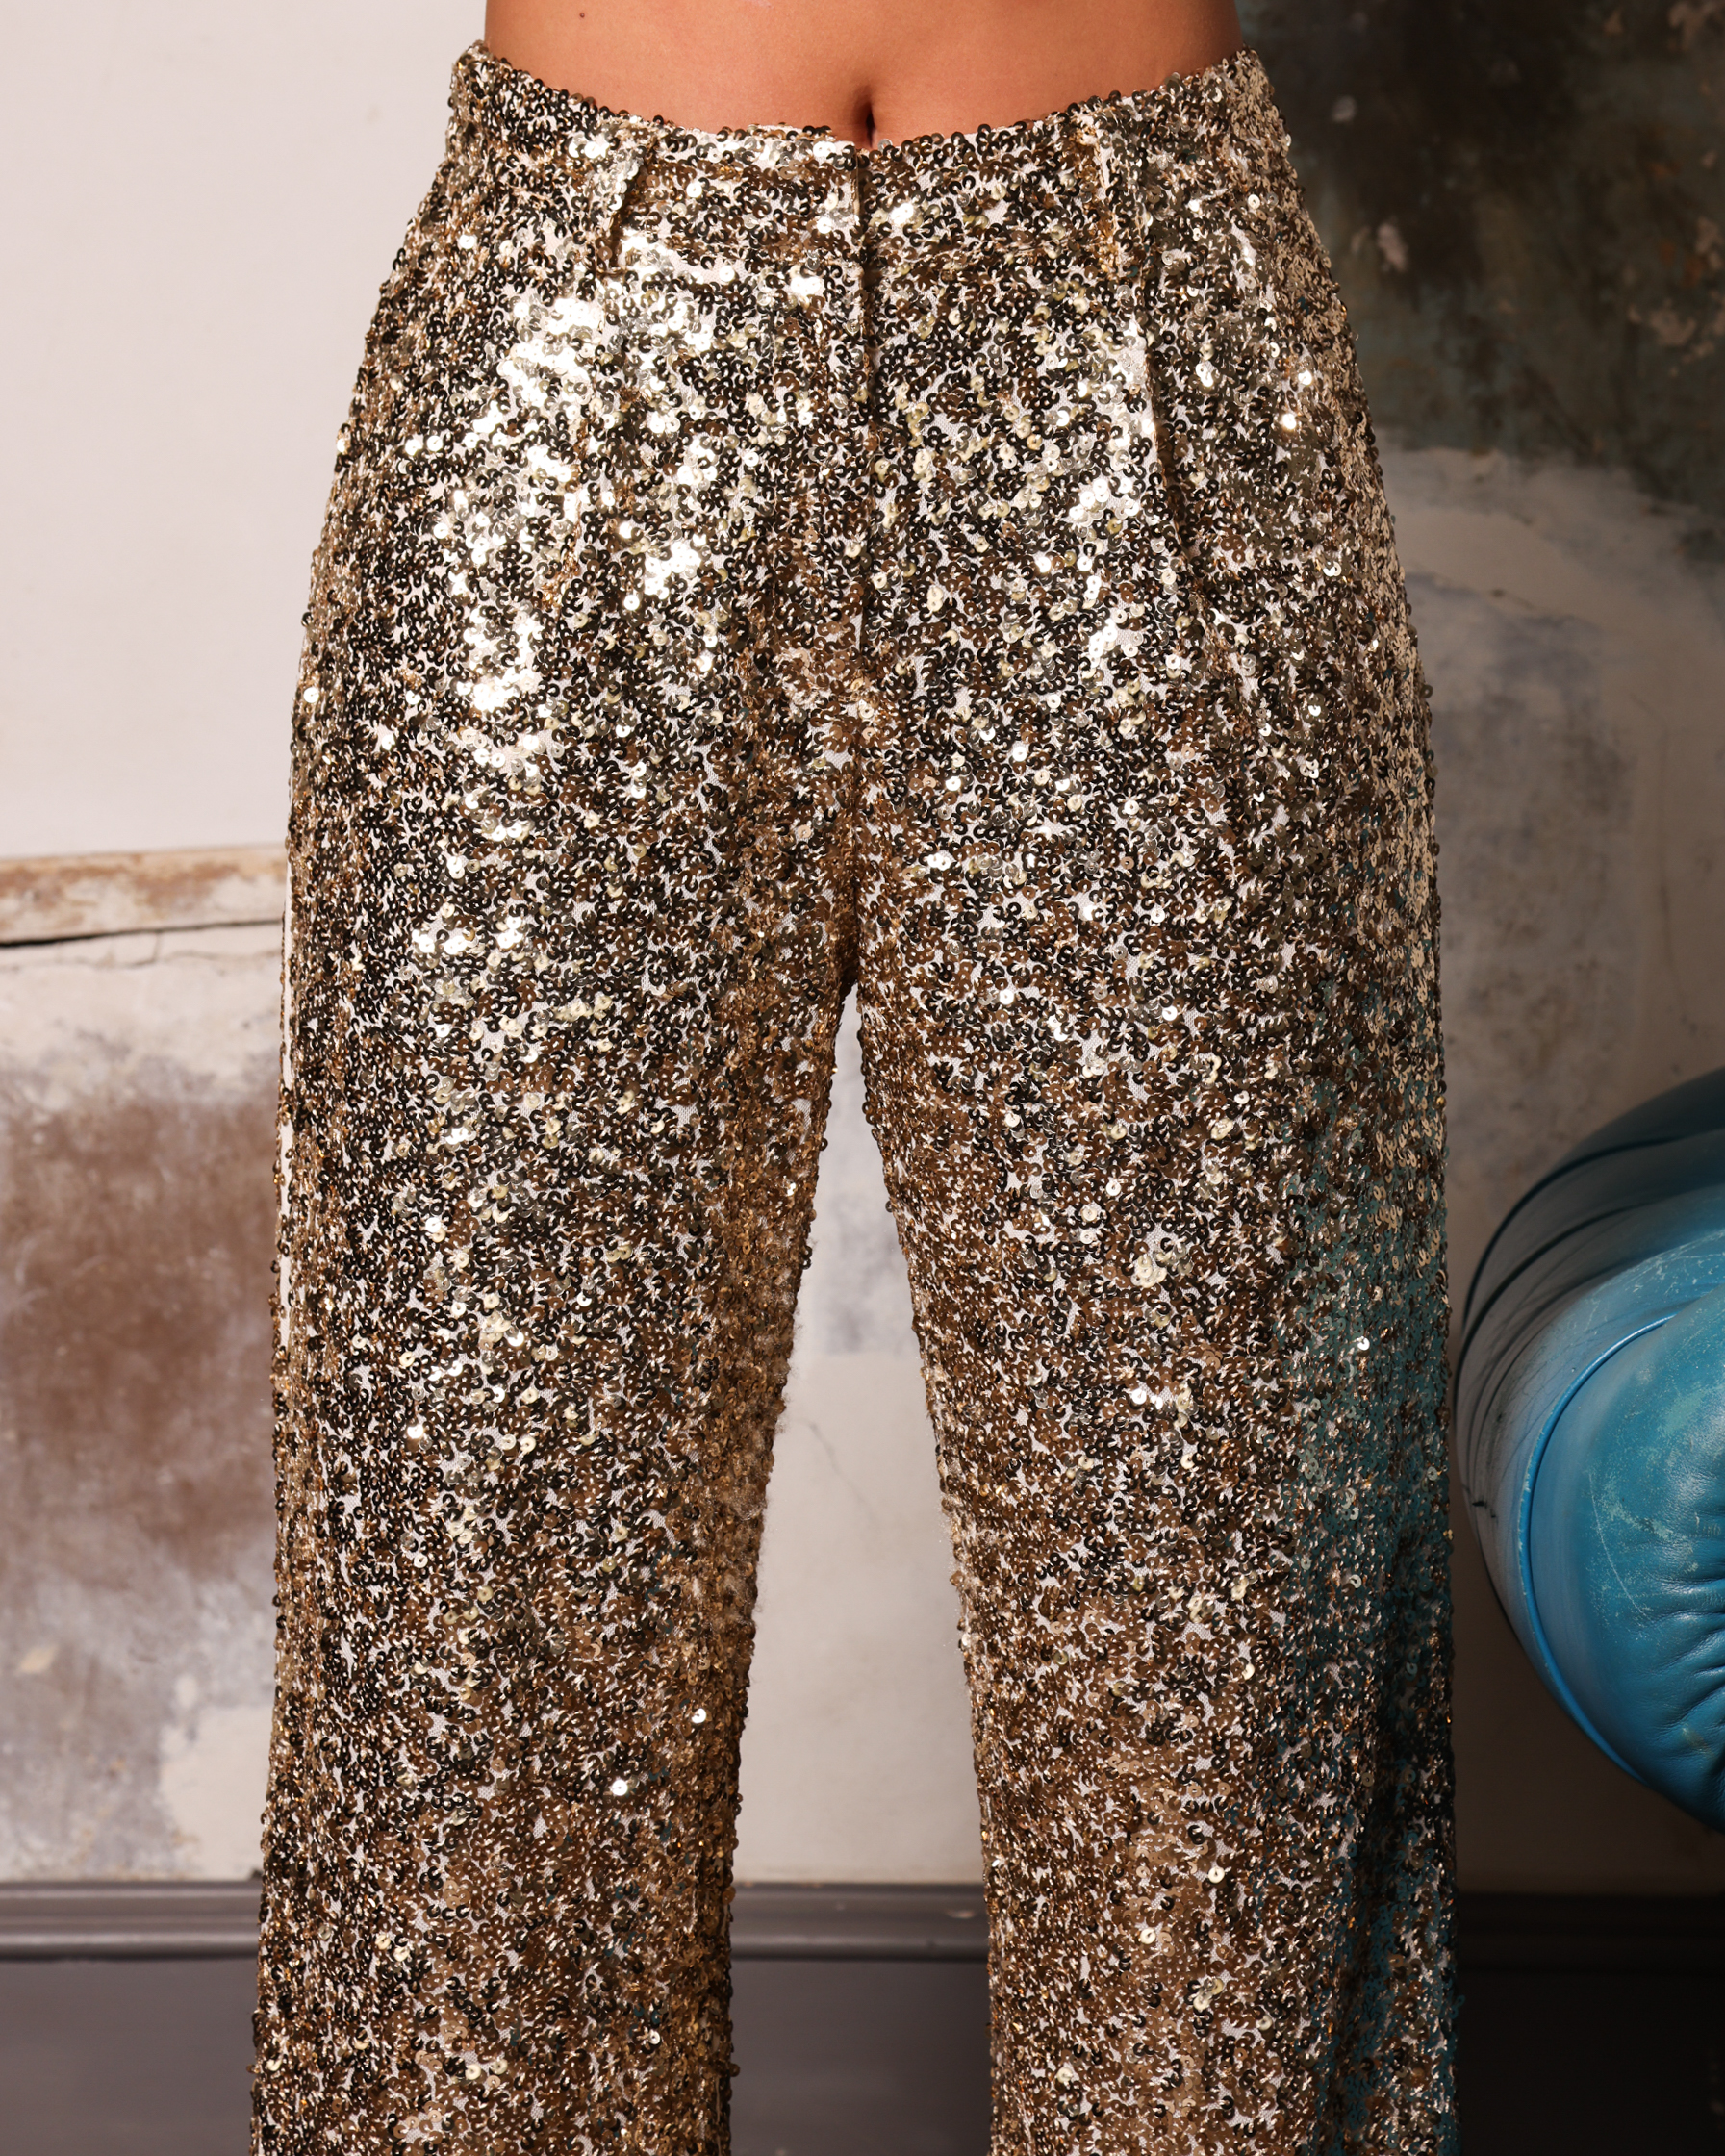 Zara Sequin Pants and Top Wide Leg Style Charade